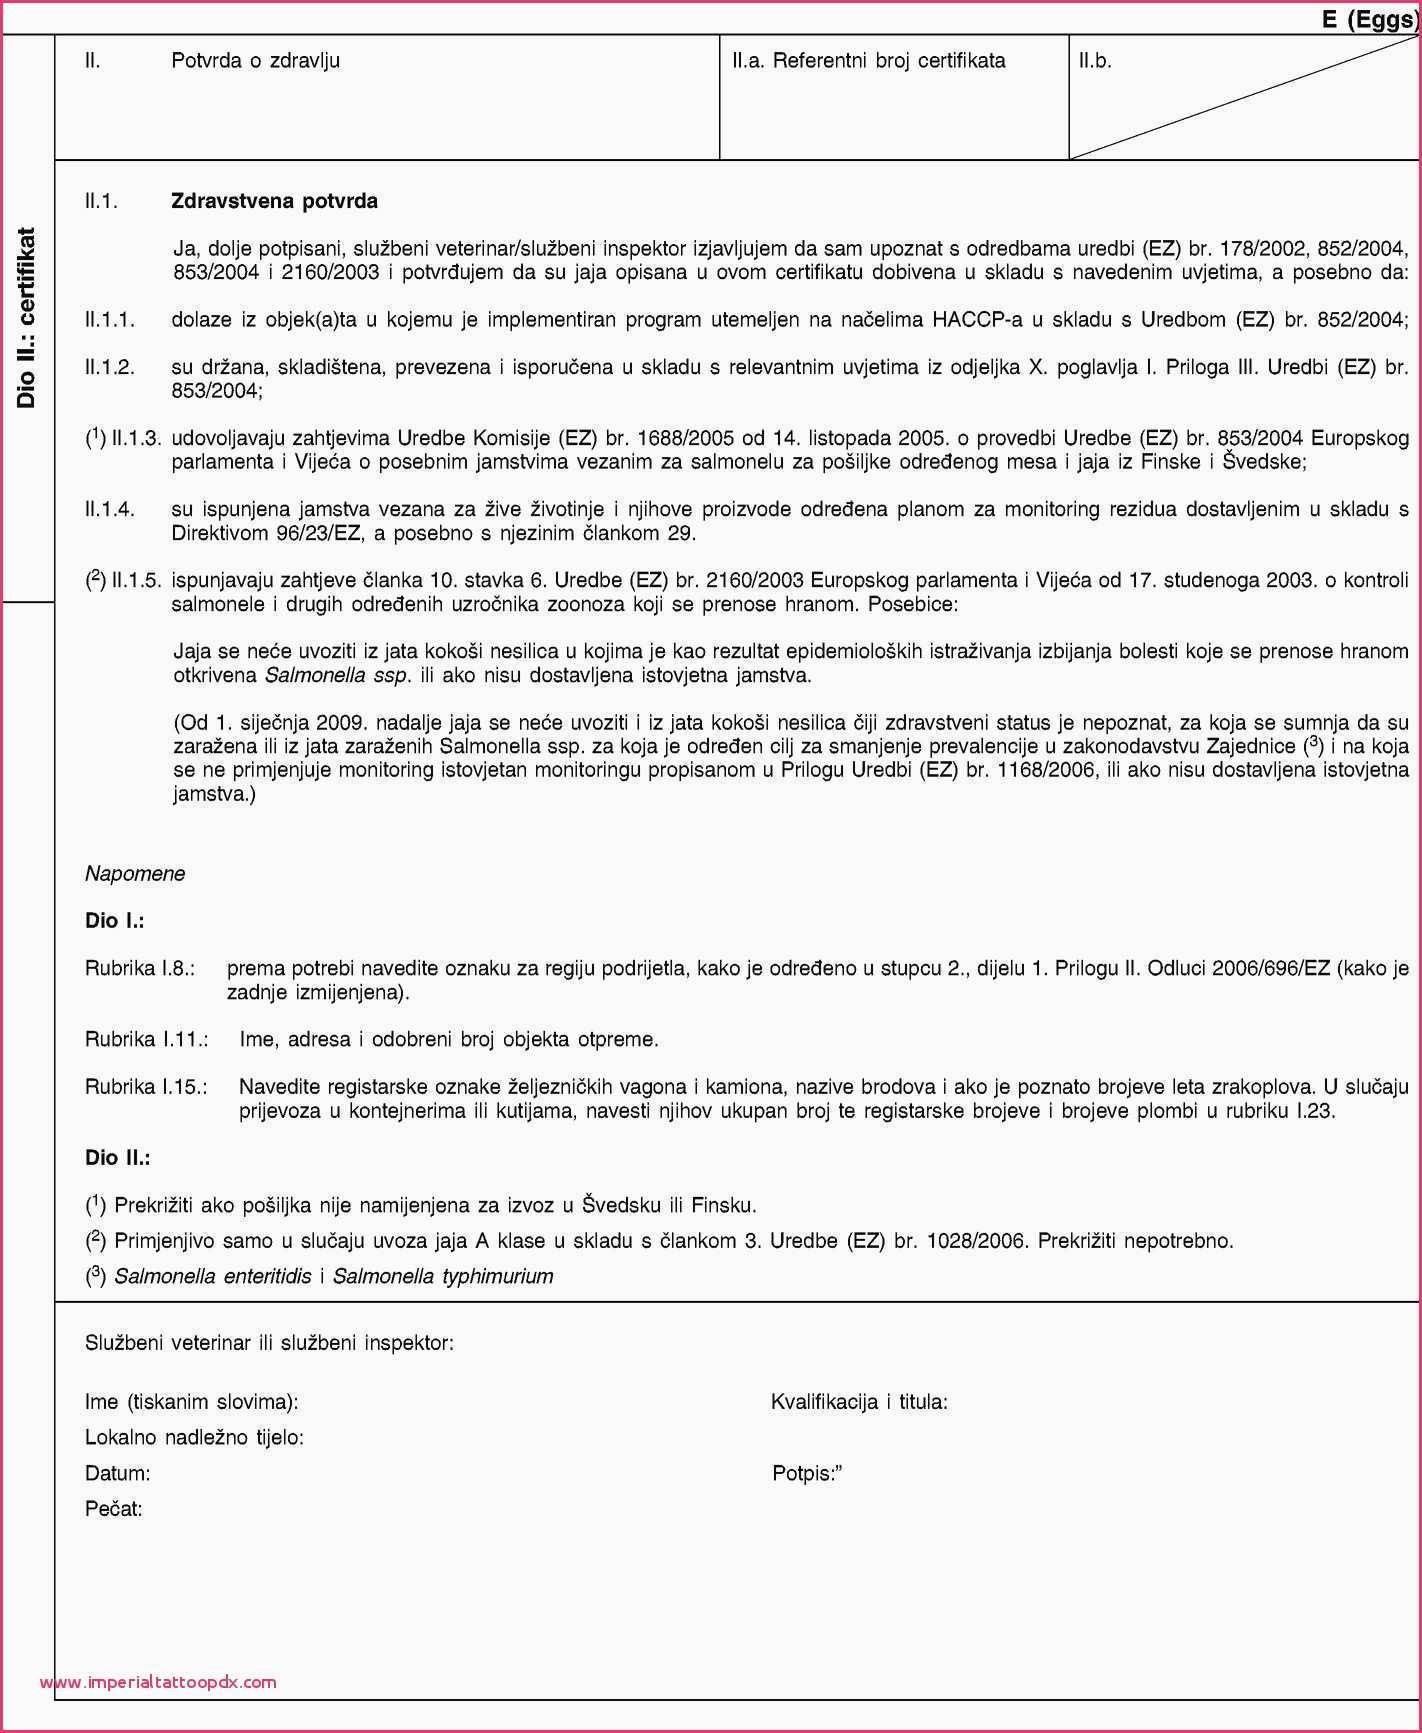 Simple Agreement Contract Business Contract Checklist Kahwin Pdf Best Of Sample Agreement